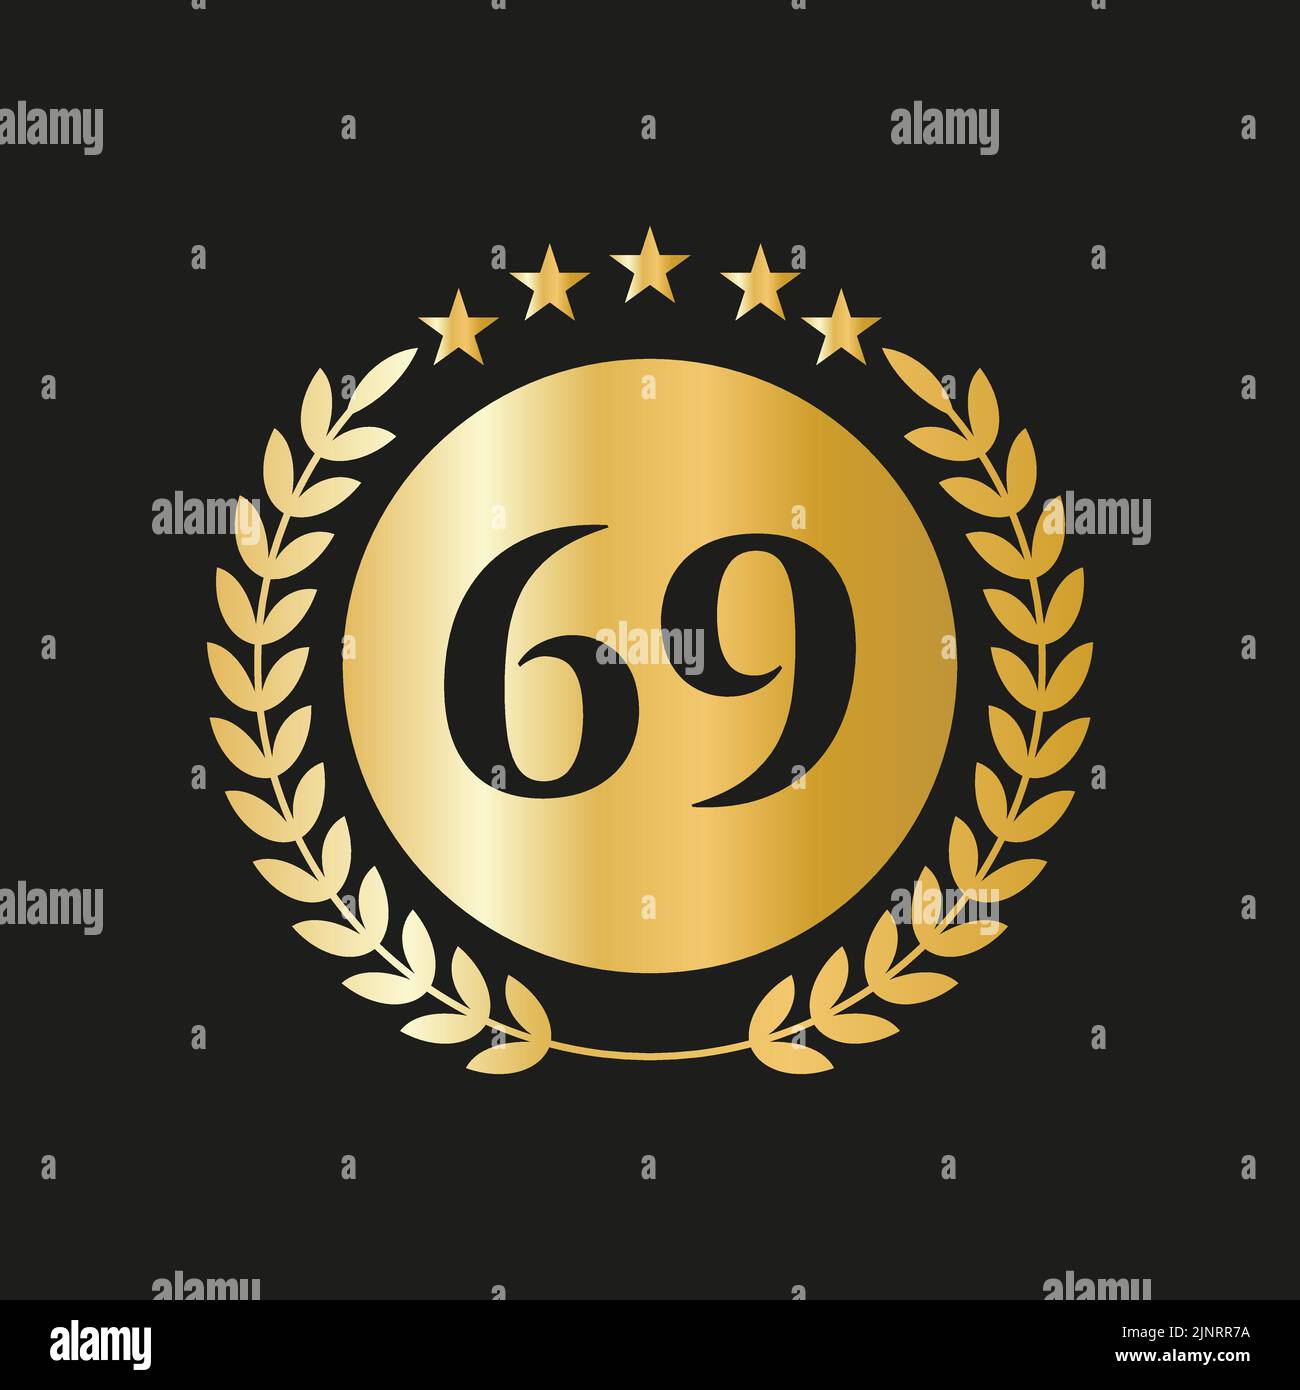 69 Years Anniversary Celebration Icon Vector Logo Design Template With